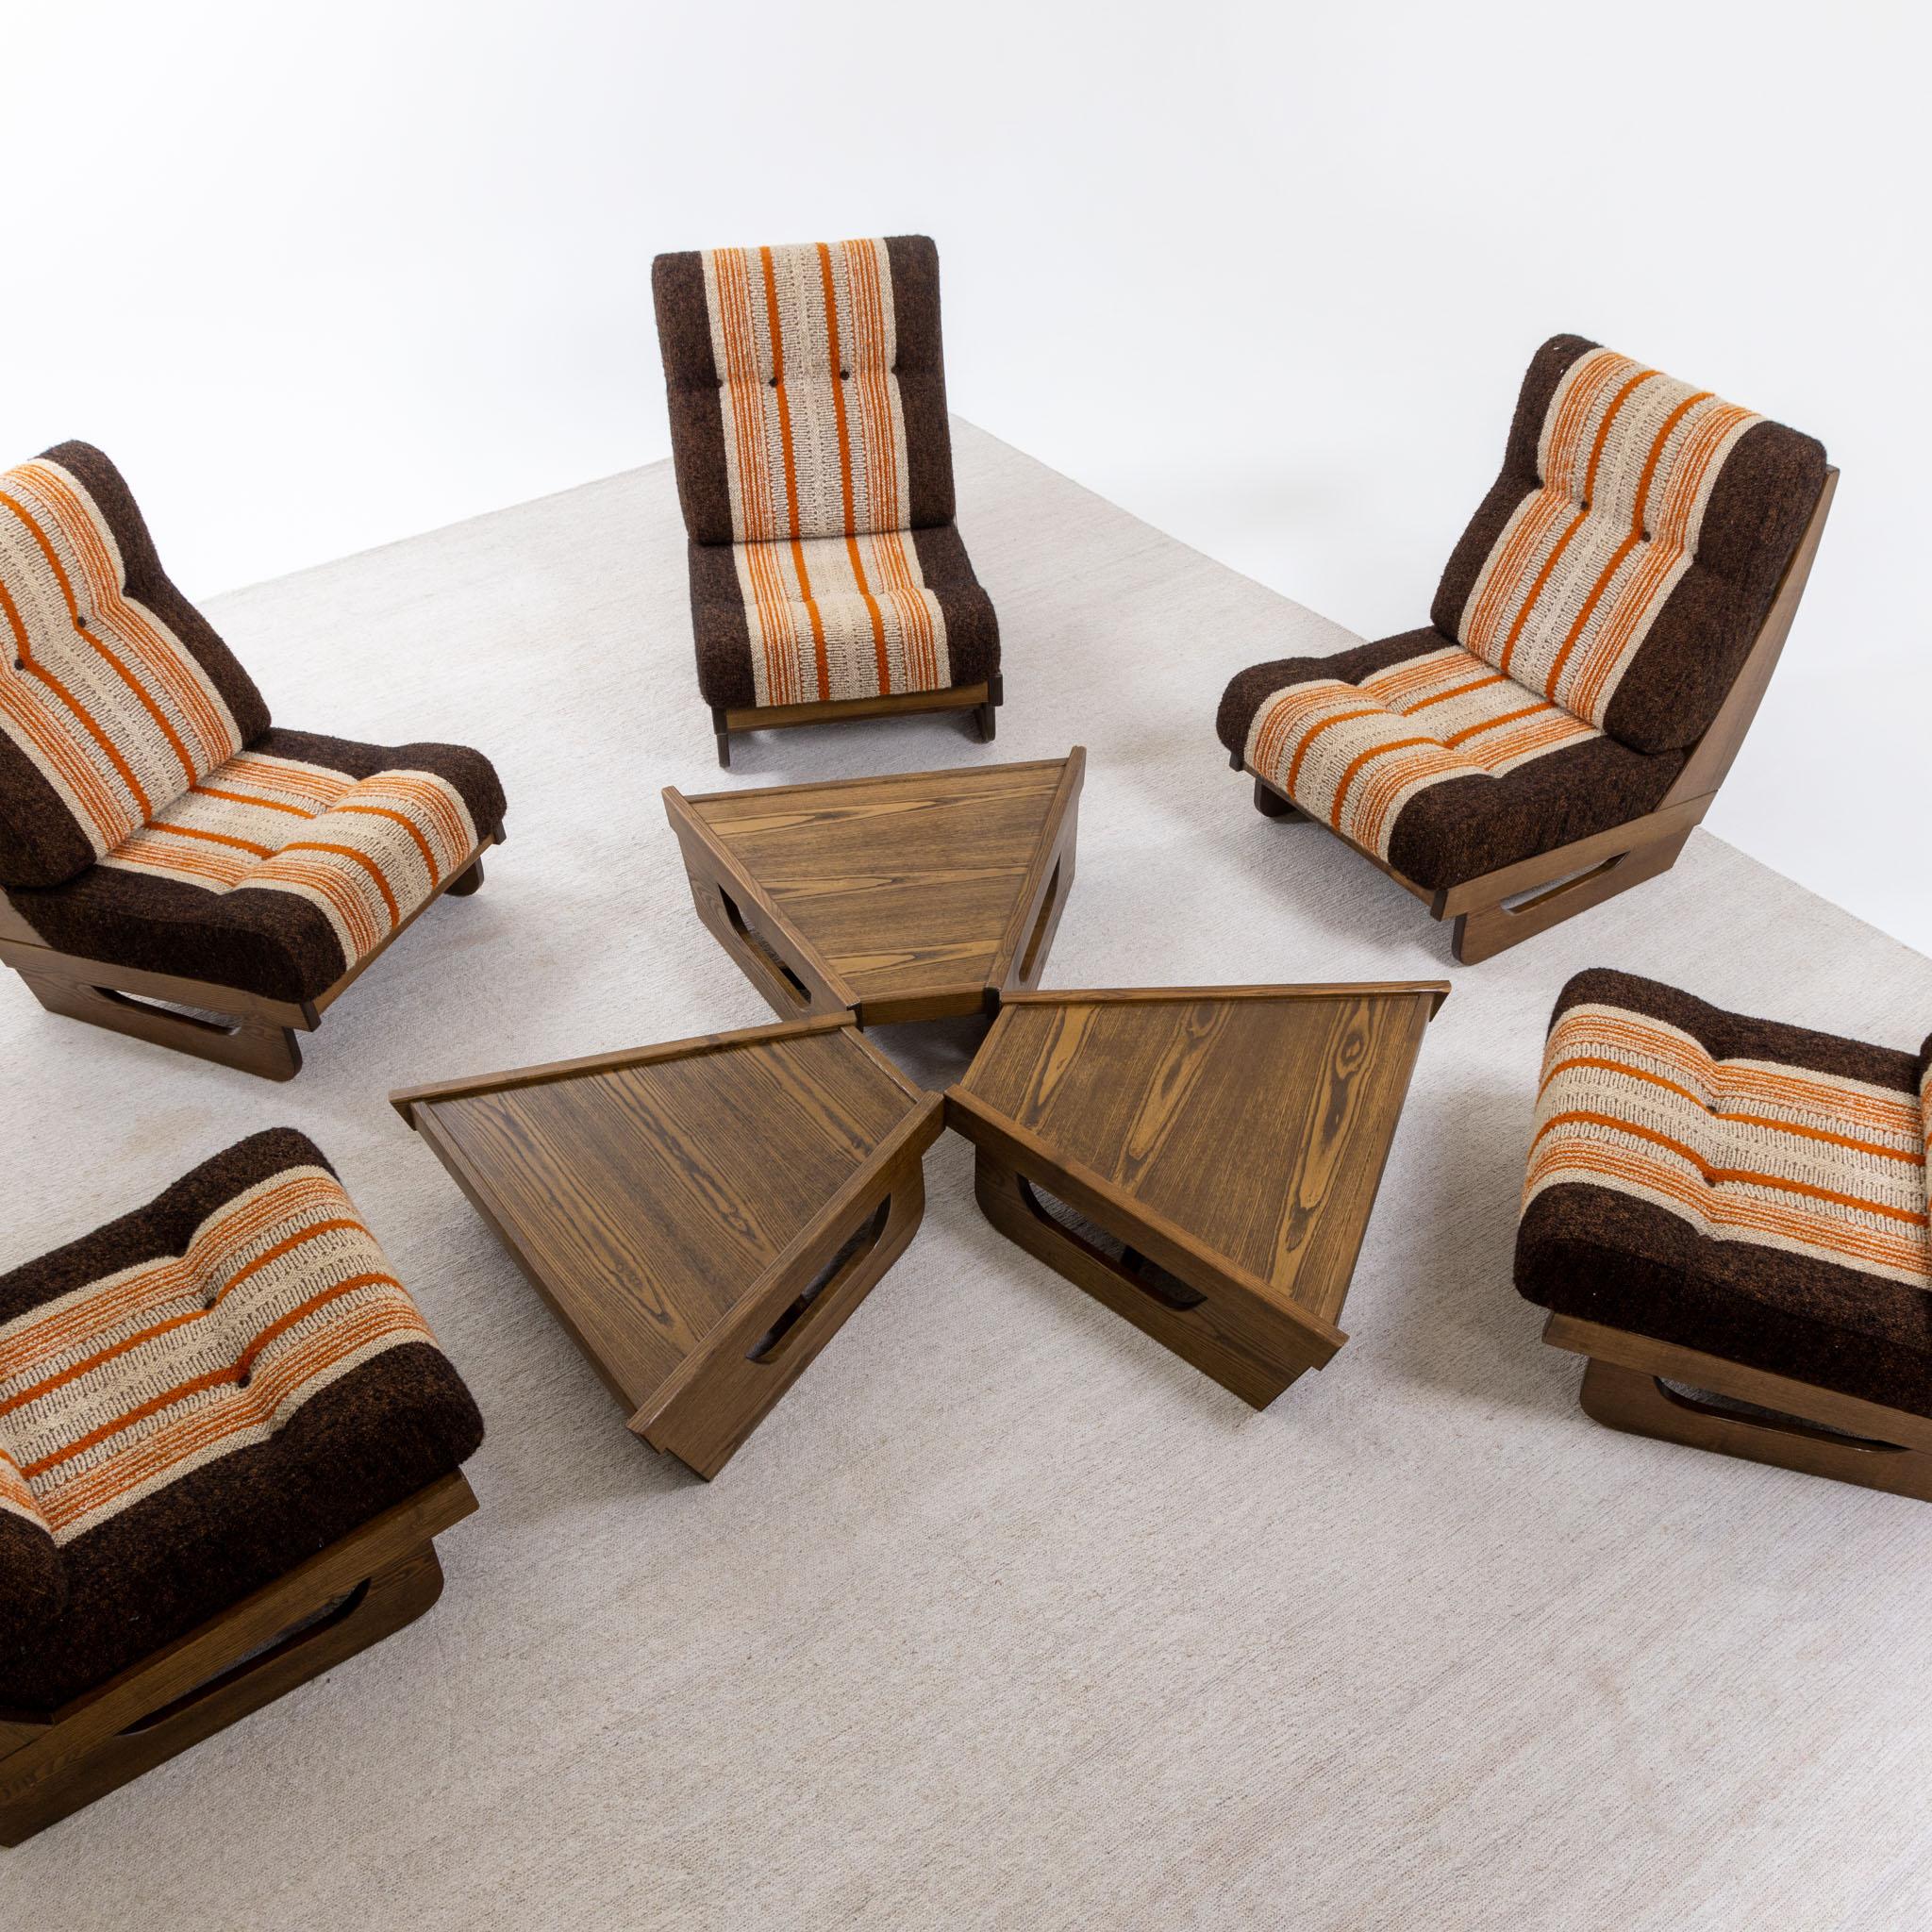 Modular Seating Group with five Lounge Chairs, Italy 1950s For Sale 5